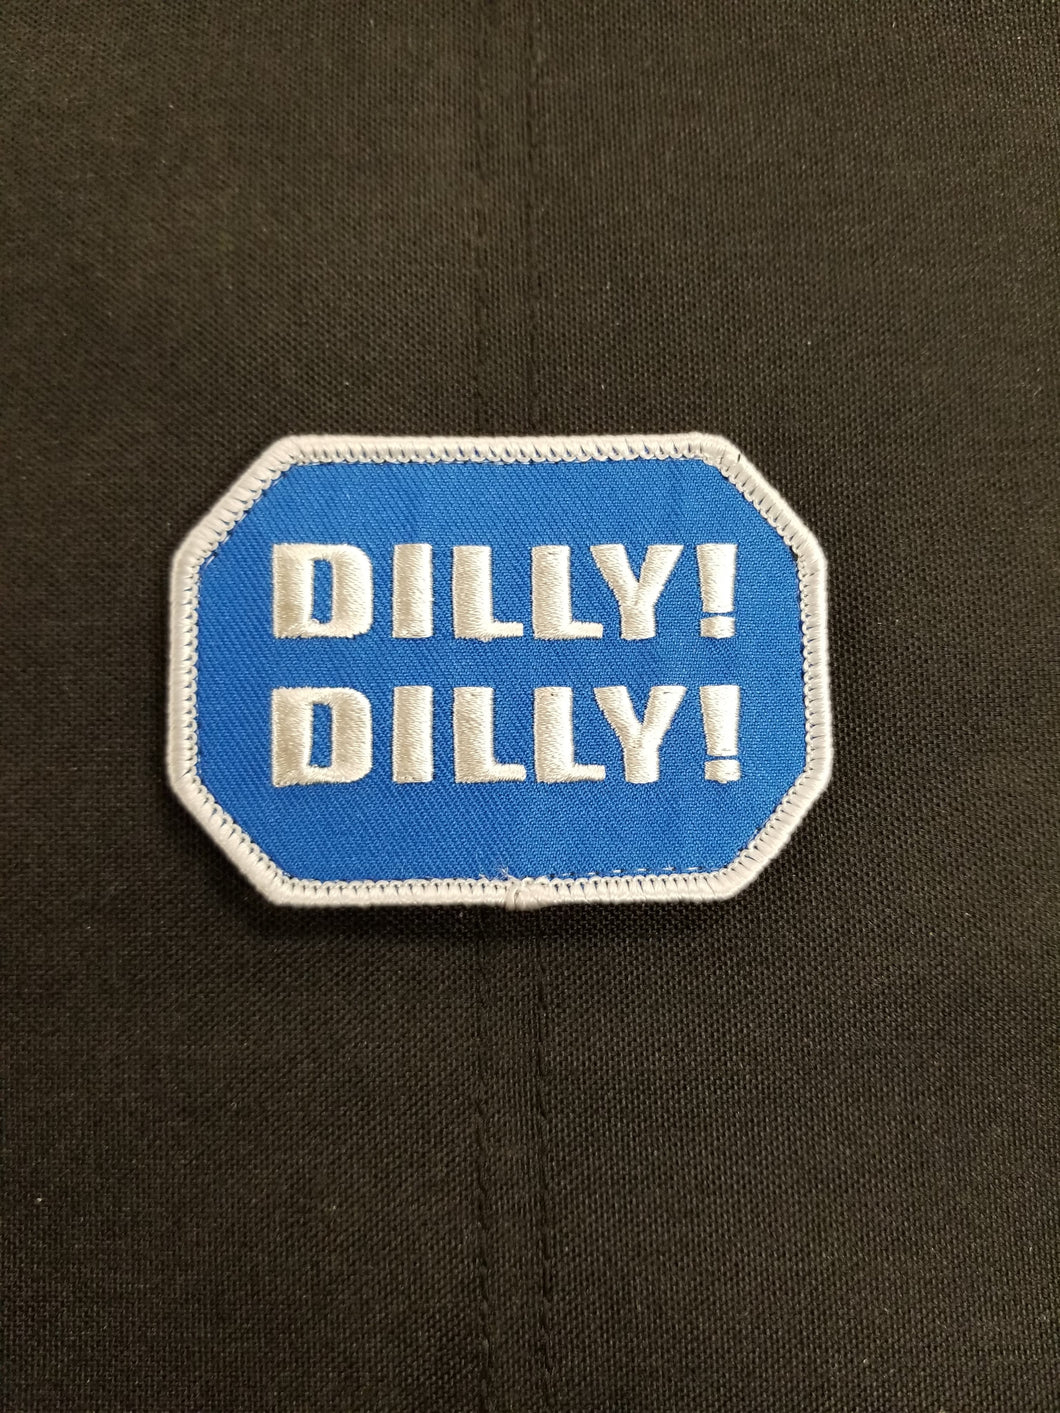 Dilly Dilly! Bud Knight Edition